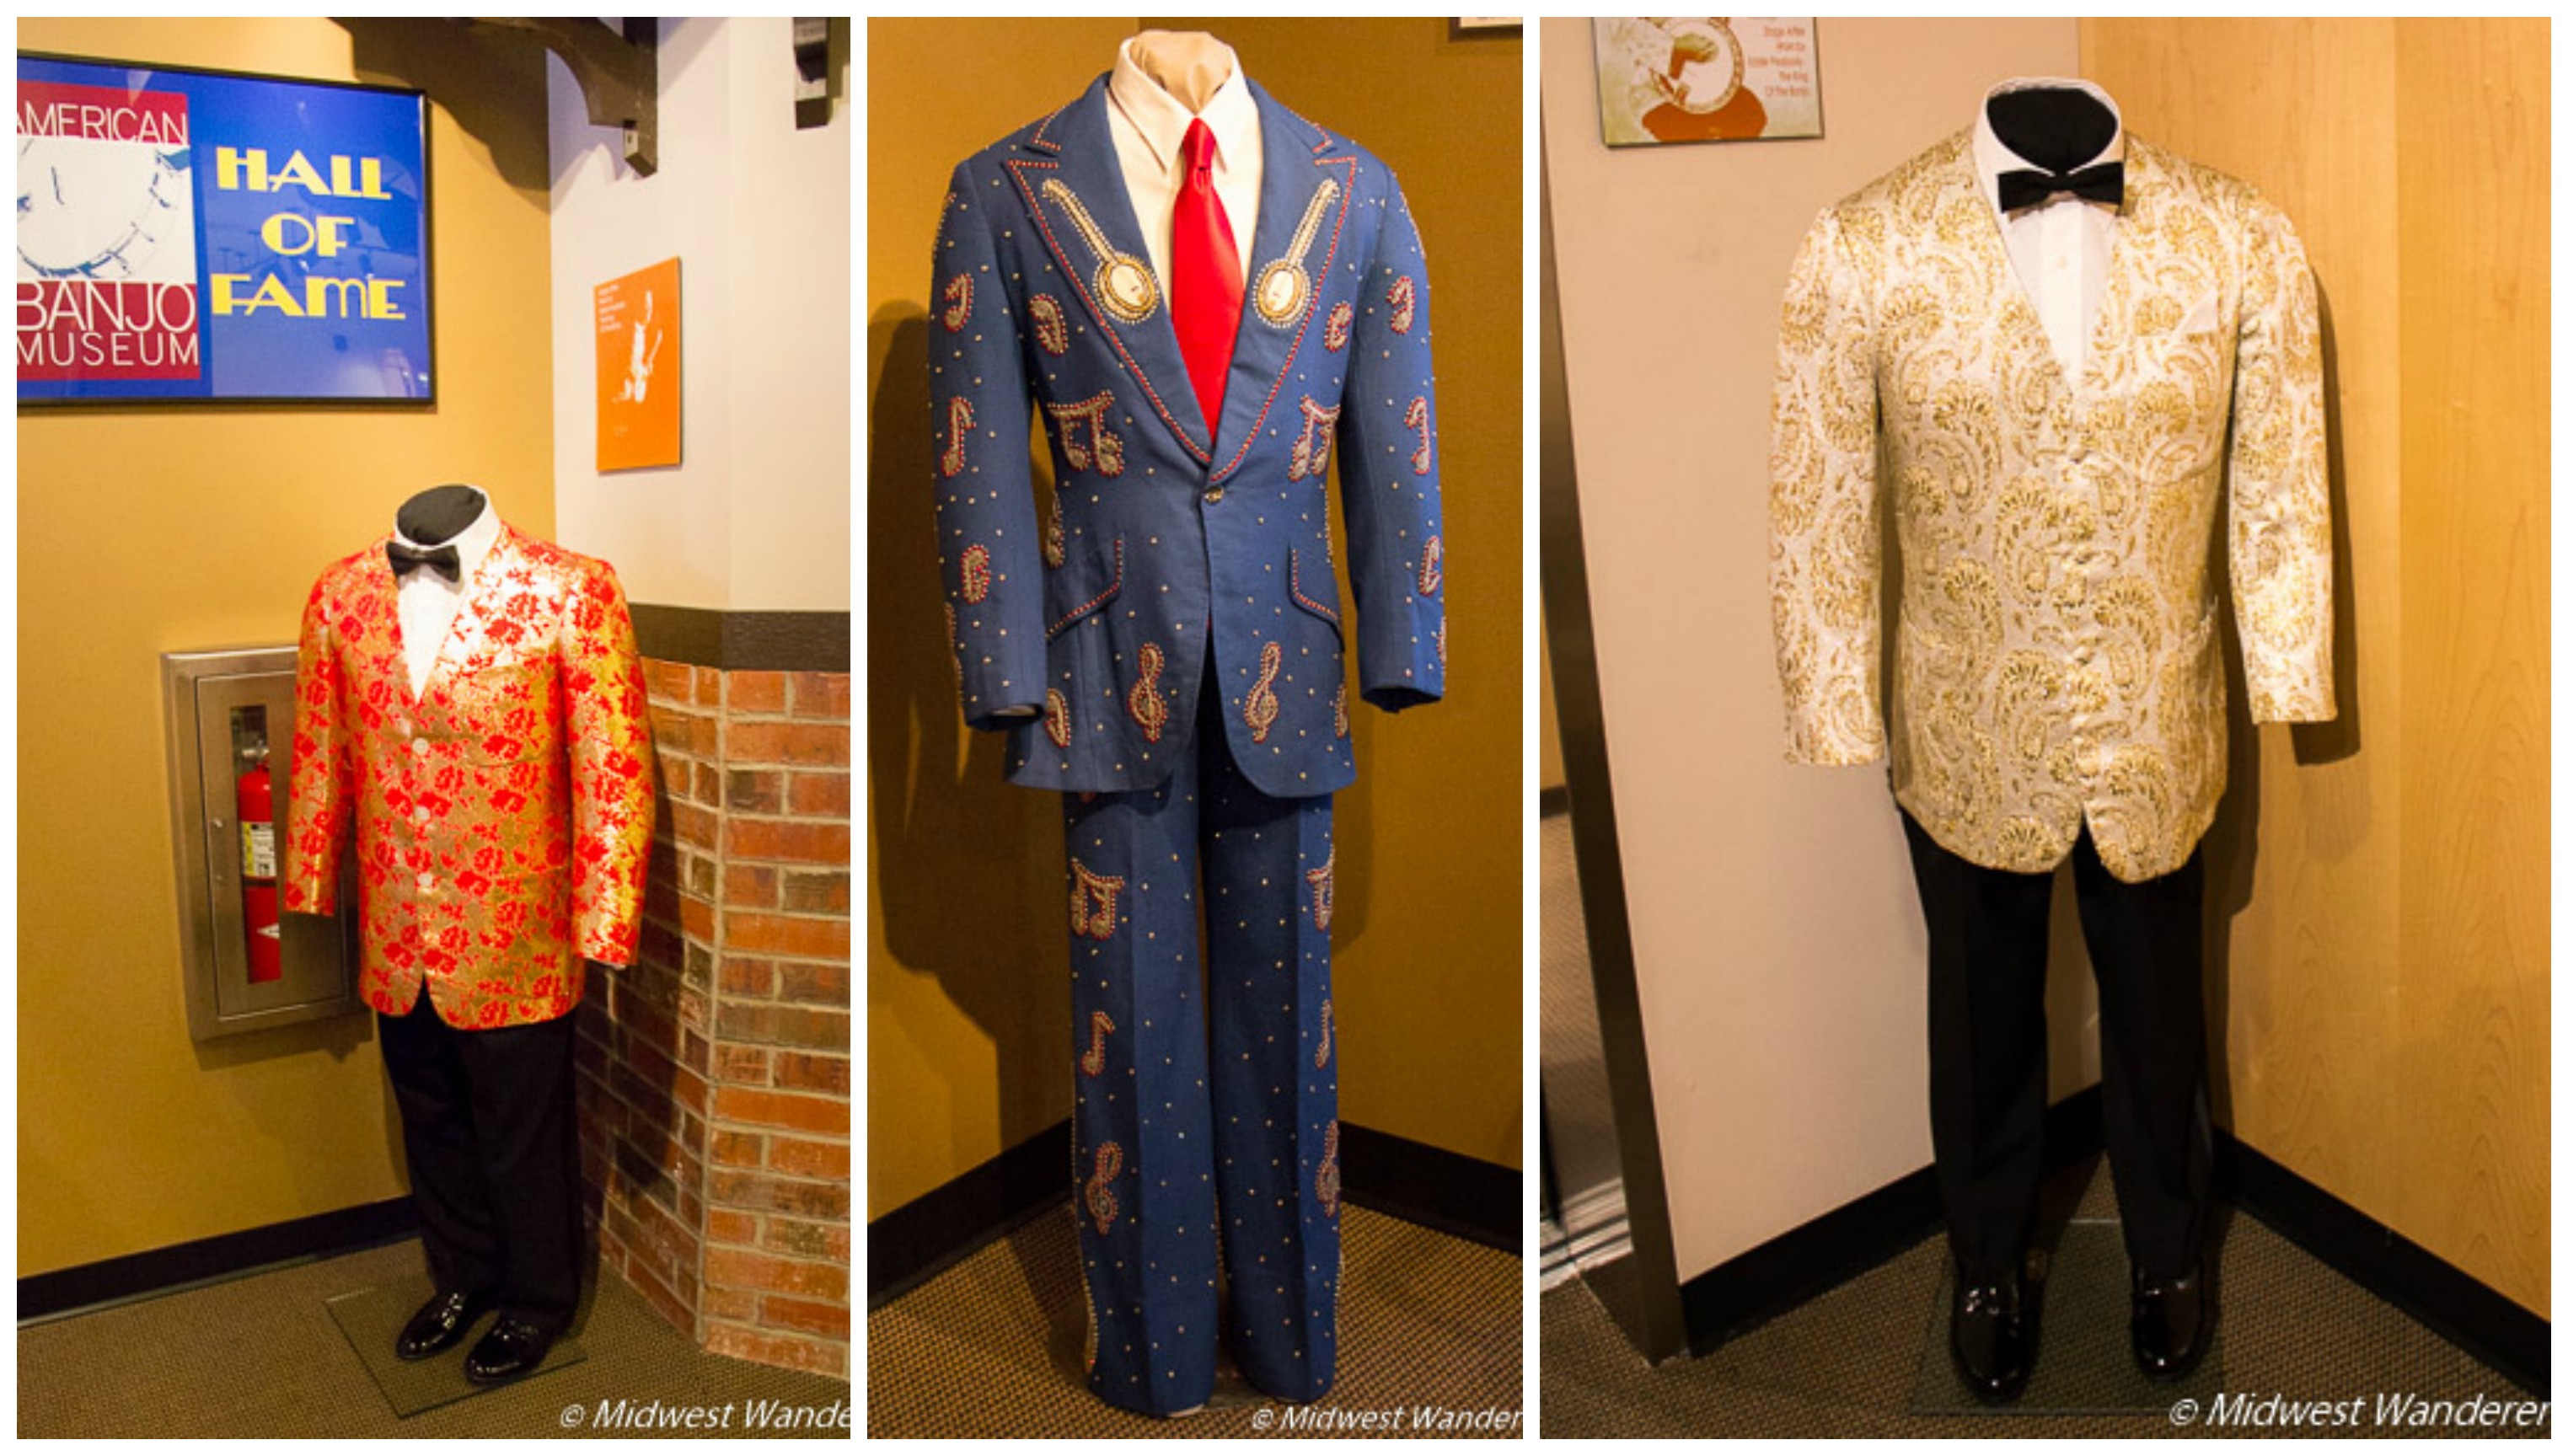 Performance Outfits in the Banjo Hall of Fame